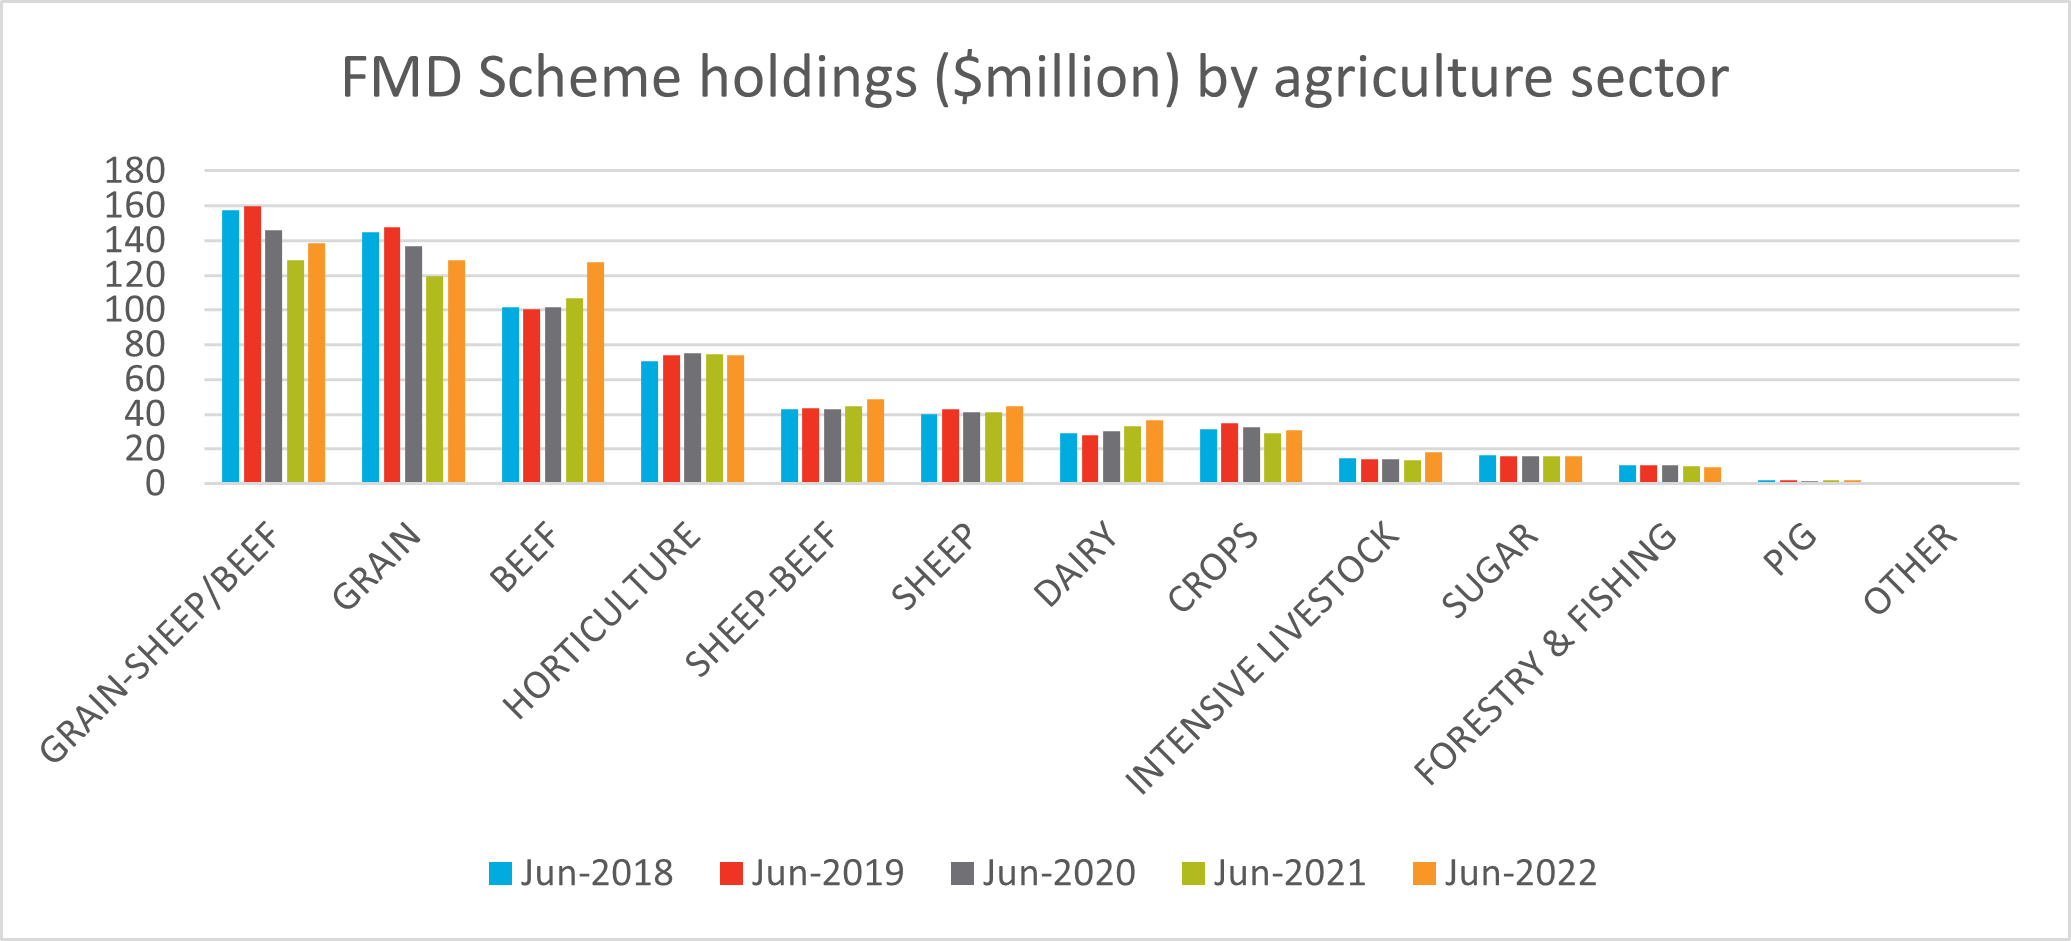 A graph showing year on year growth of FMD scheme holding by agricultural sectors from June 2018 – June 2022. All industries show growth except for forestry/ fishing and horticulture.